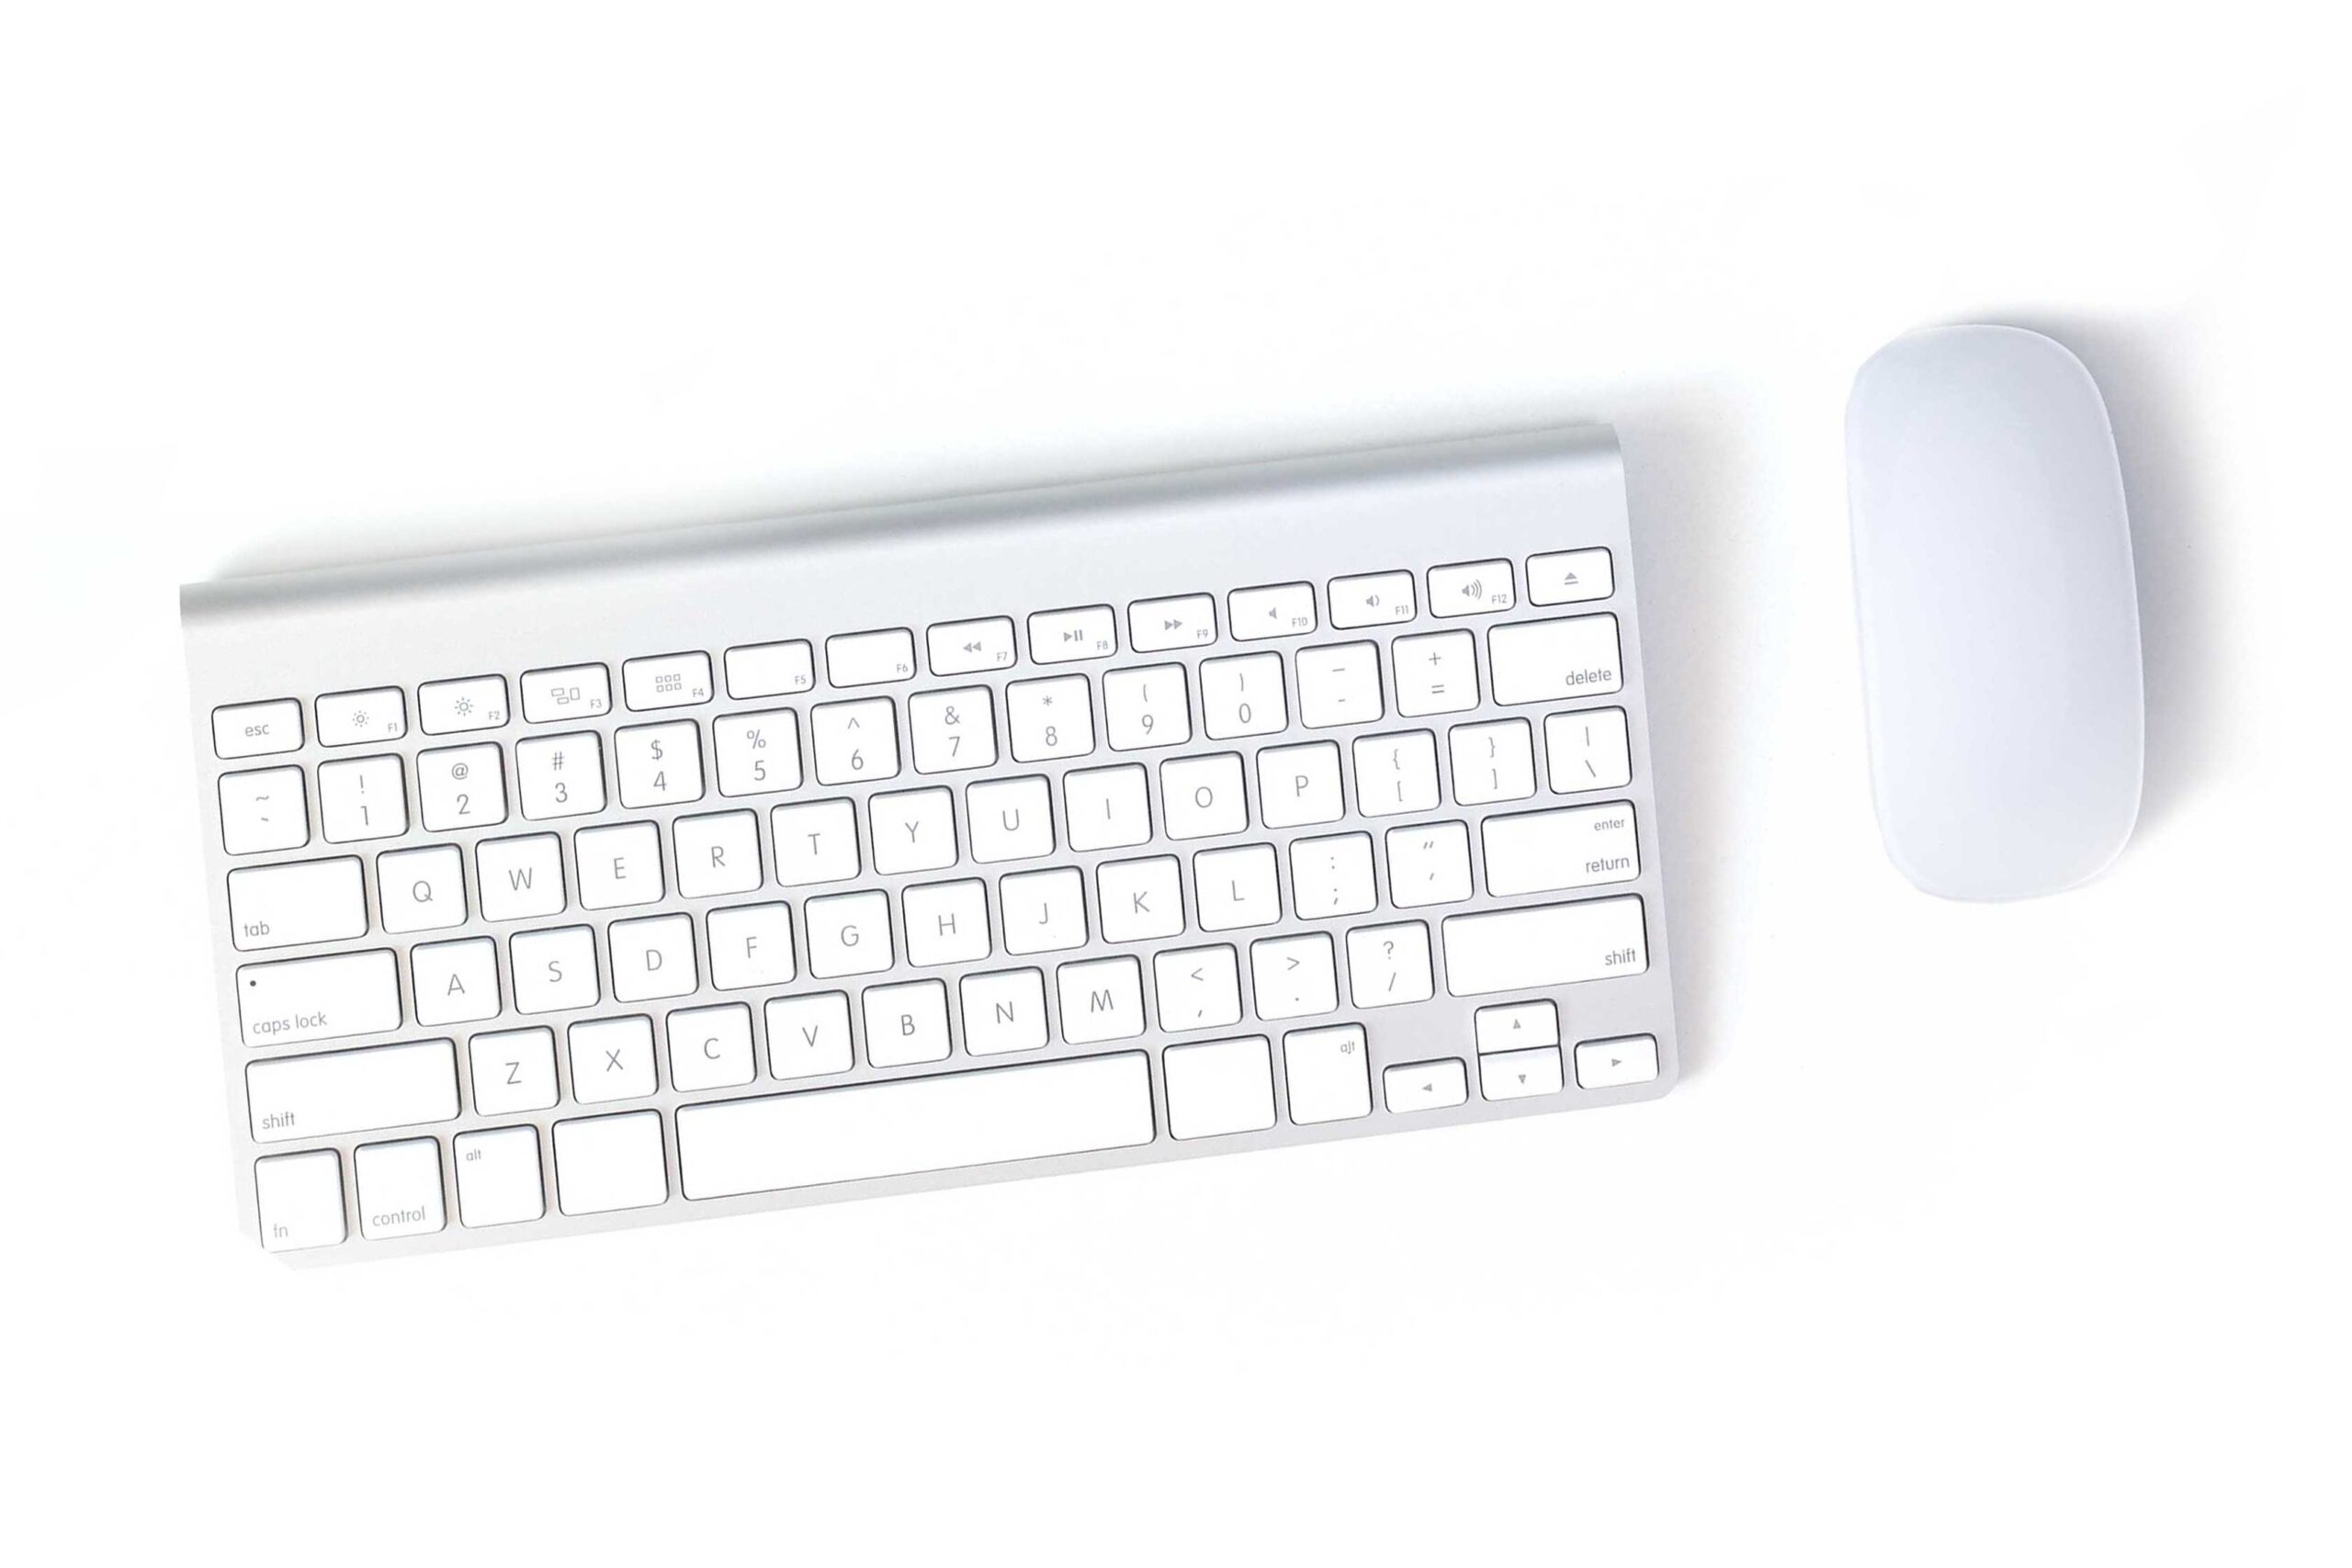 An aerial view of a white keyboard, and white mouse, on a white background.